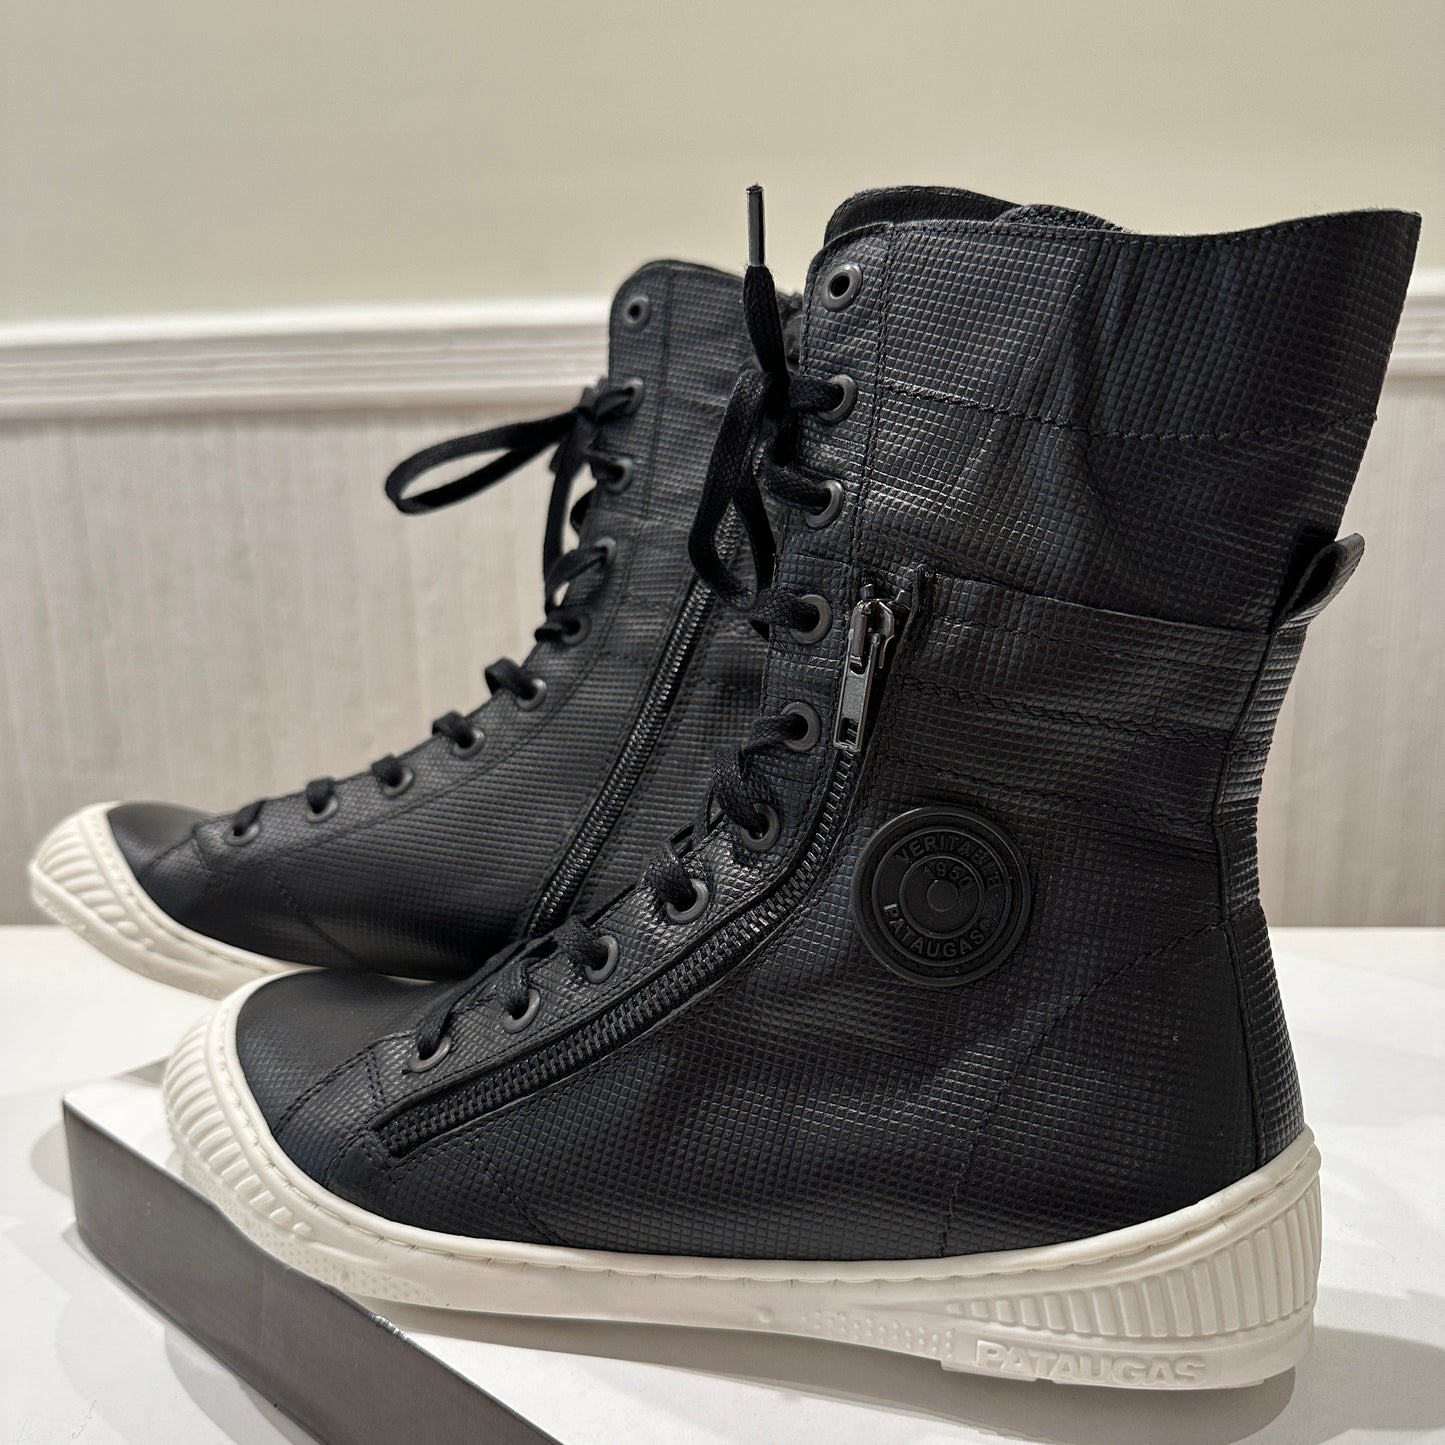 Black Rider Lace Up Boots